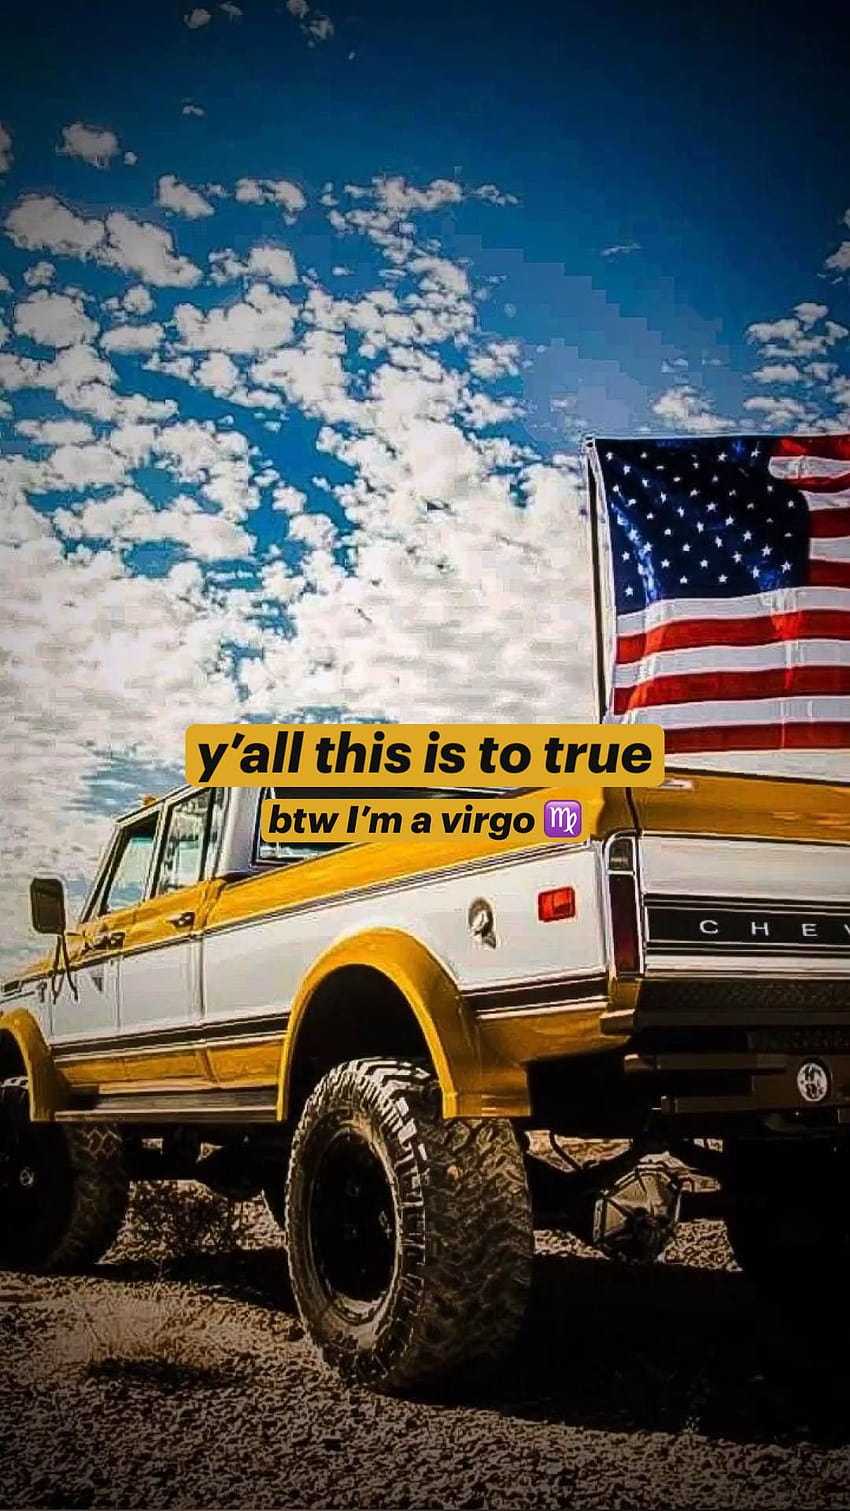 y'all this is to true, square body truck HD phone wallpaper